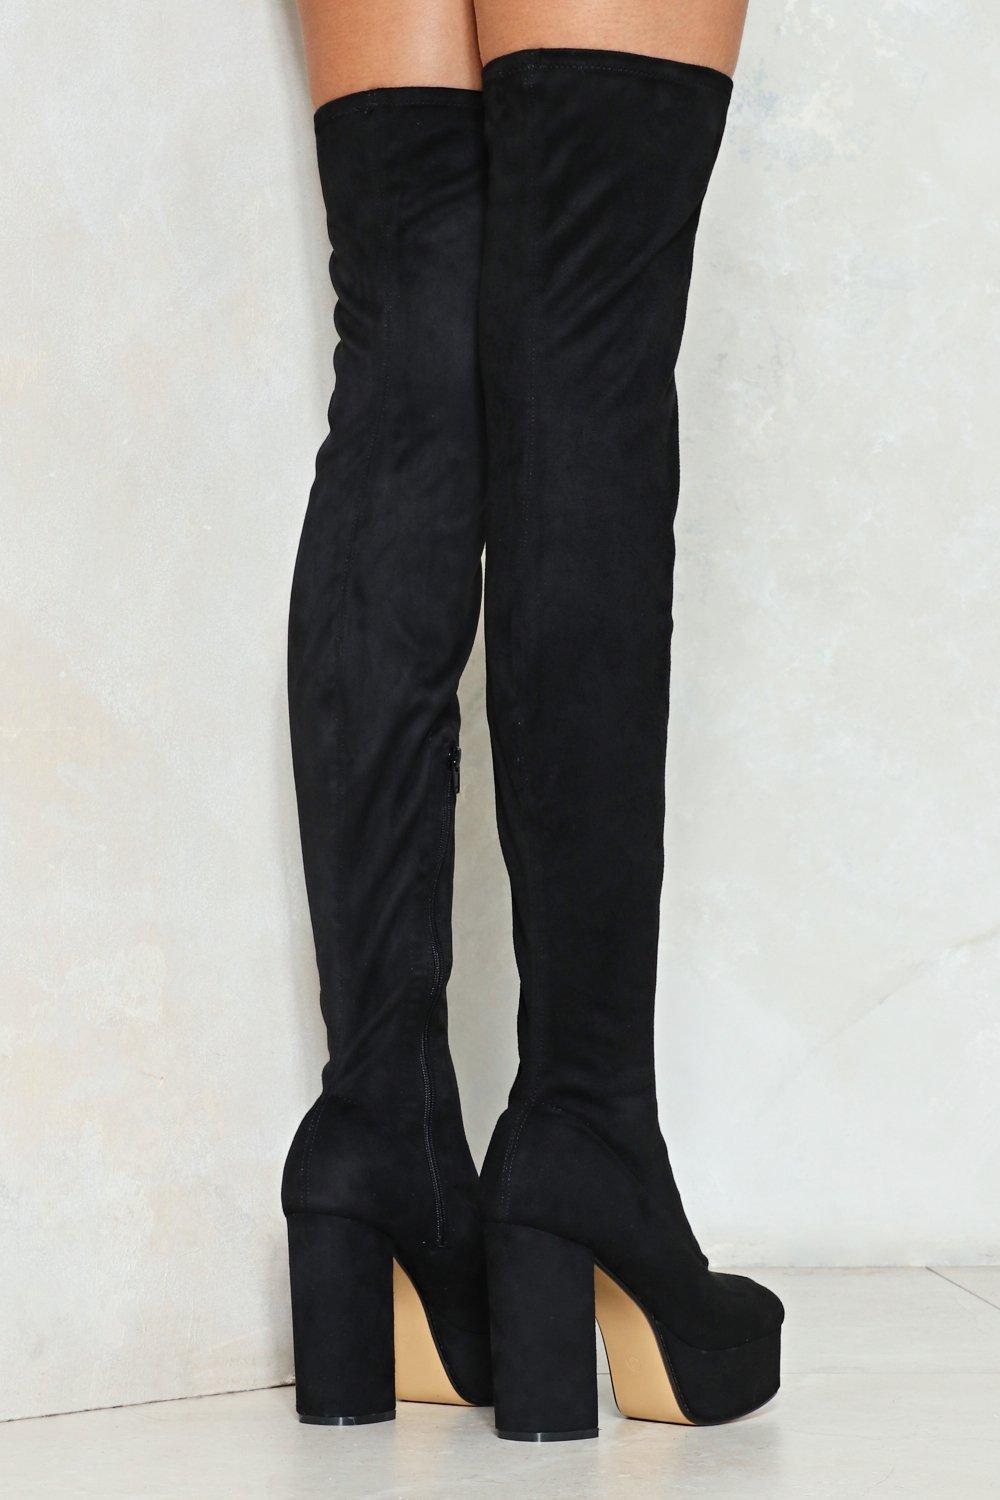 Nasty Gal Take The High Road Thigh-high Boot in Black - Lyst